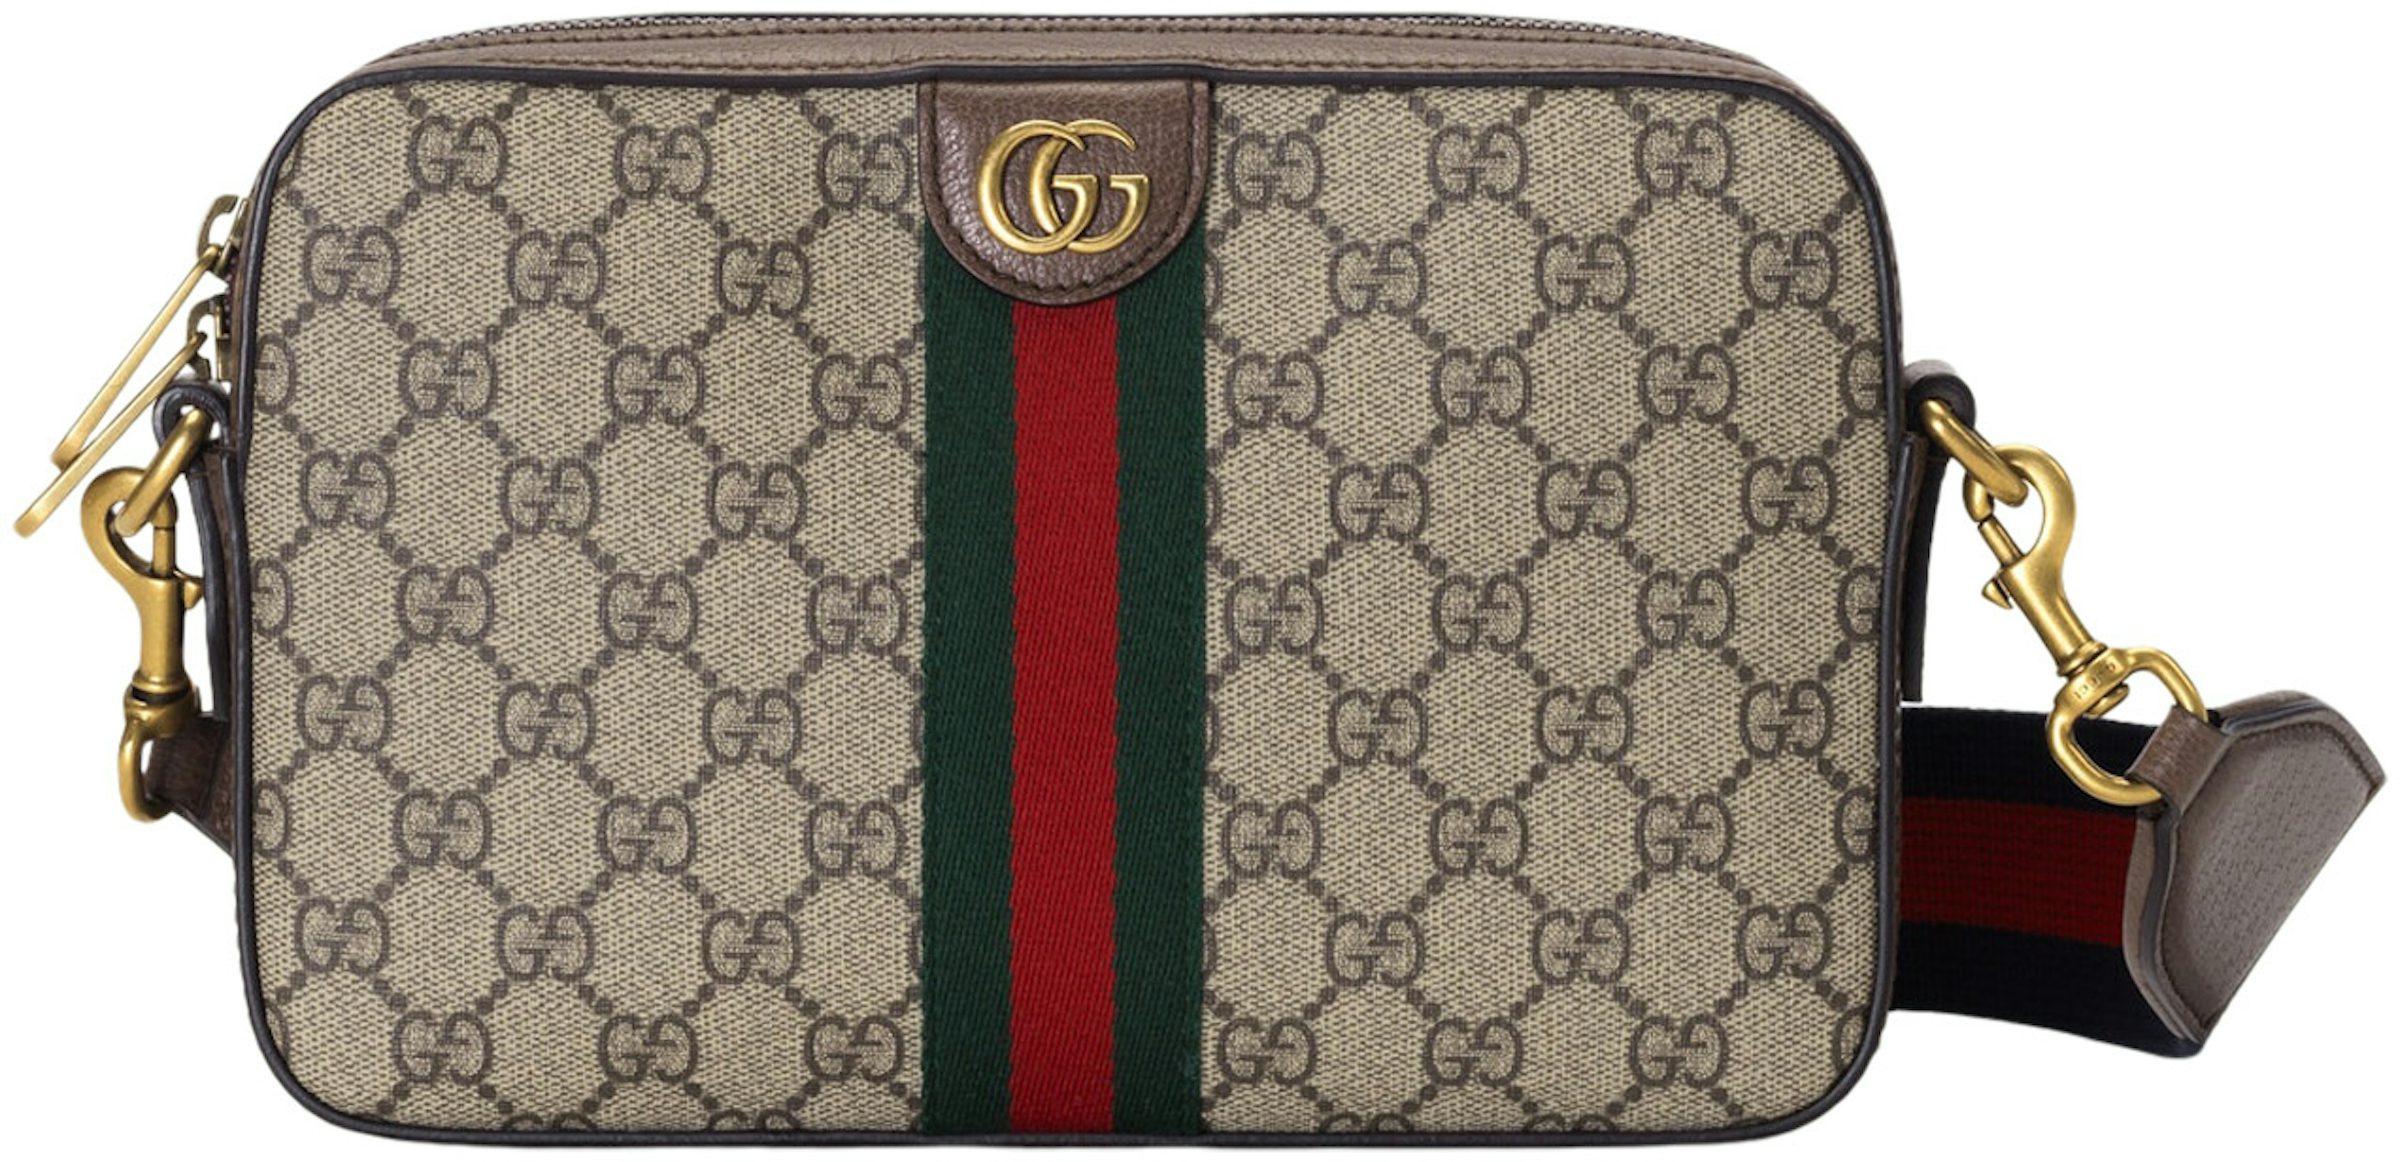 Gucci Ophidia luggage